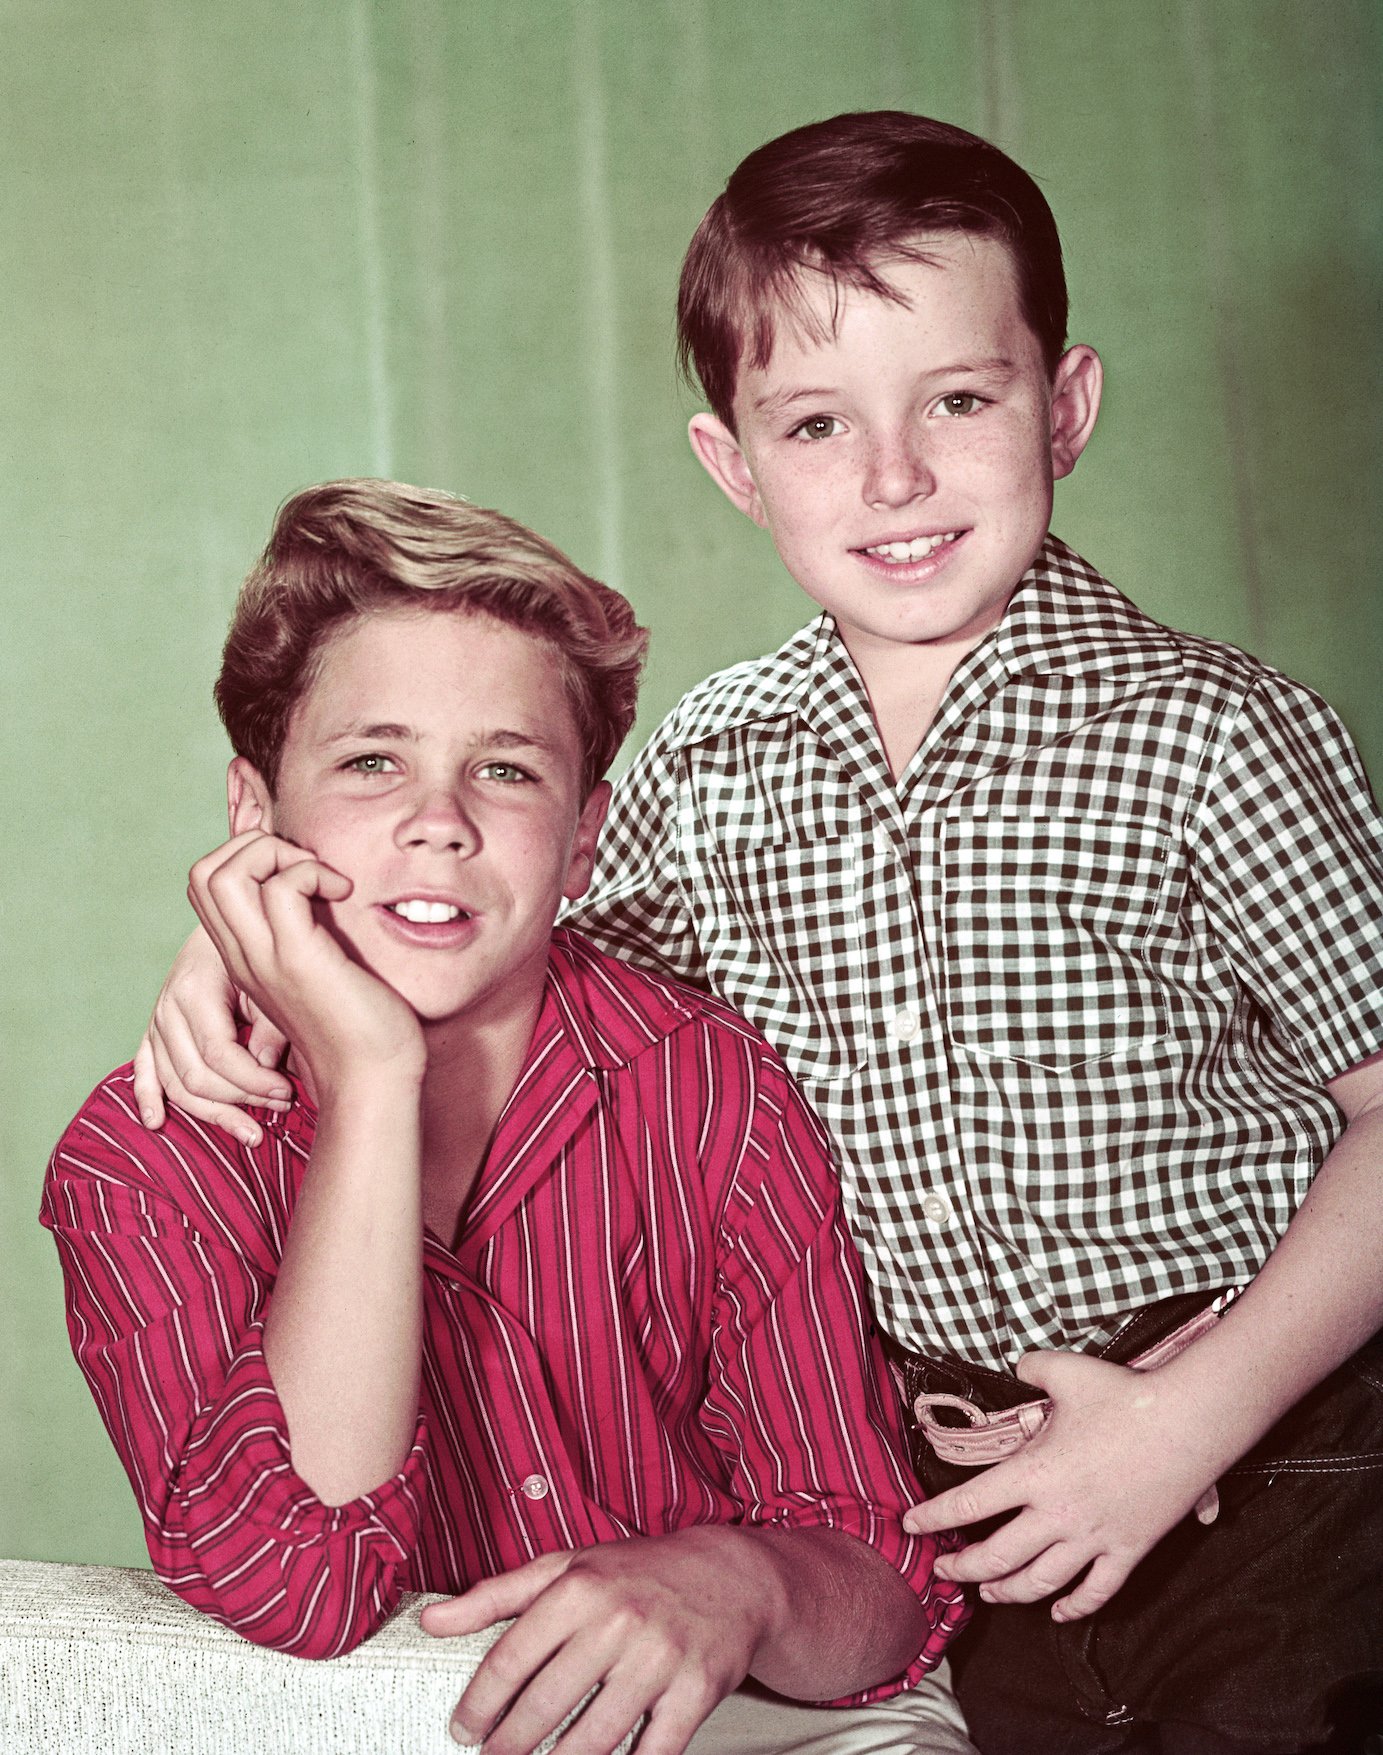 ‘Leave It To Beaver’: Tony Dow ‘Didn’t Have Control’ of His Life as Wally Cleaver